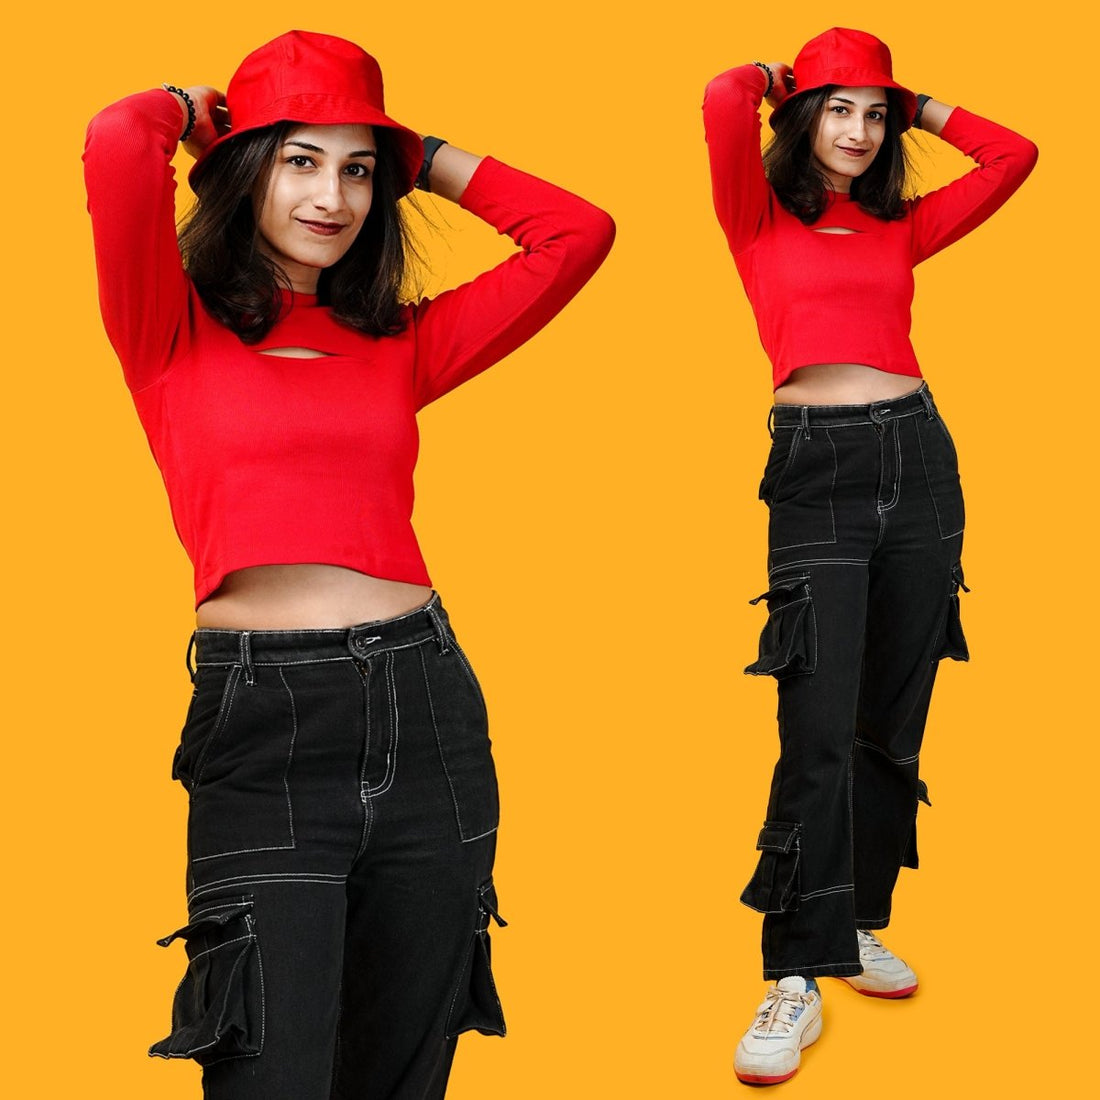 Ribbed Crop Top For Women – Red